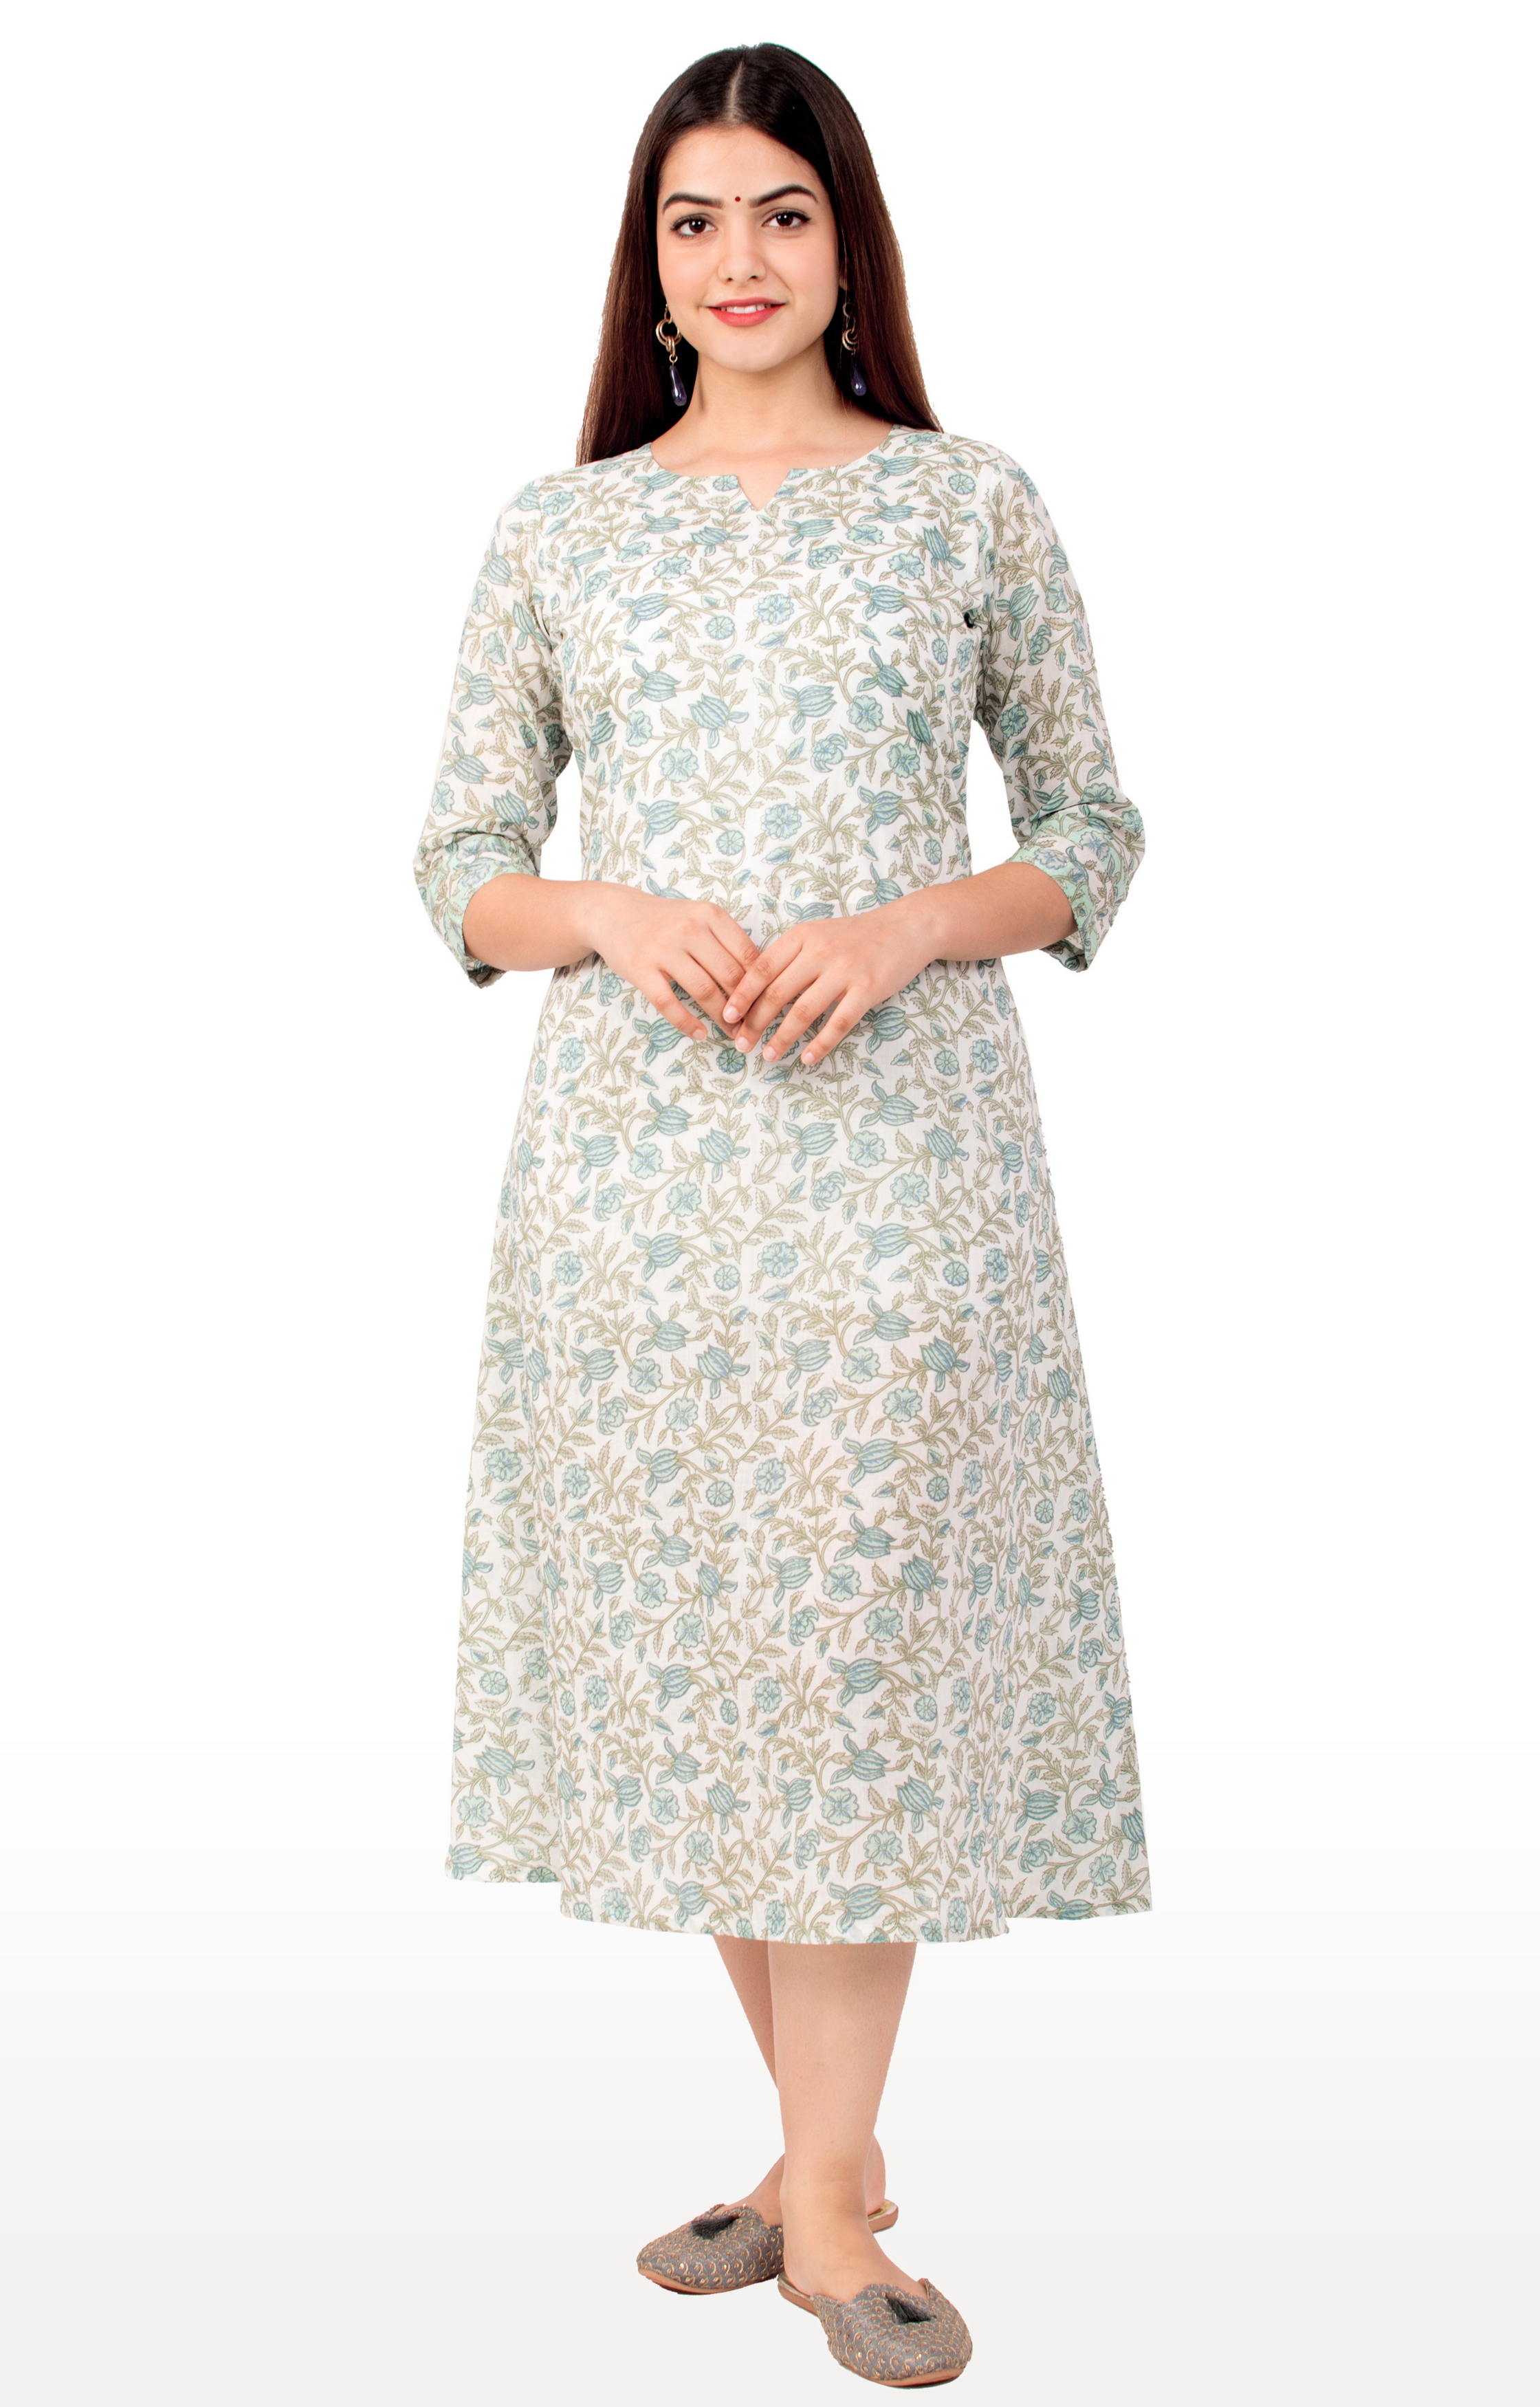 Miravan cotton floral printed A Line kurti With Jacket for women's / girls 